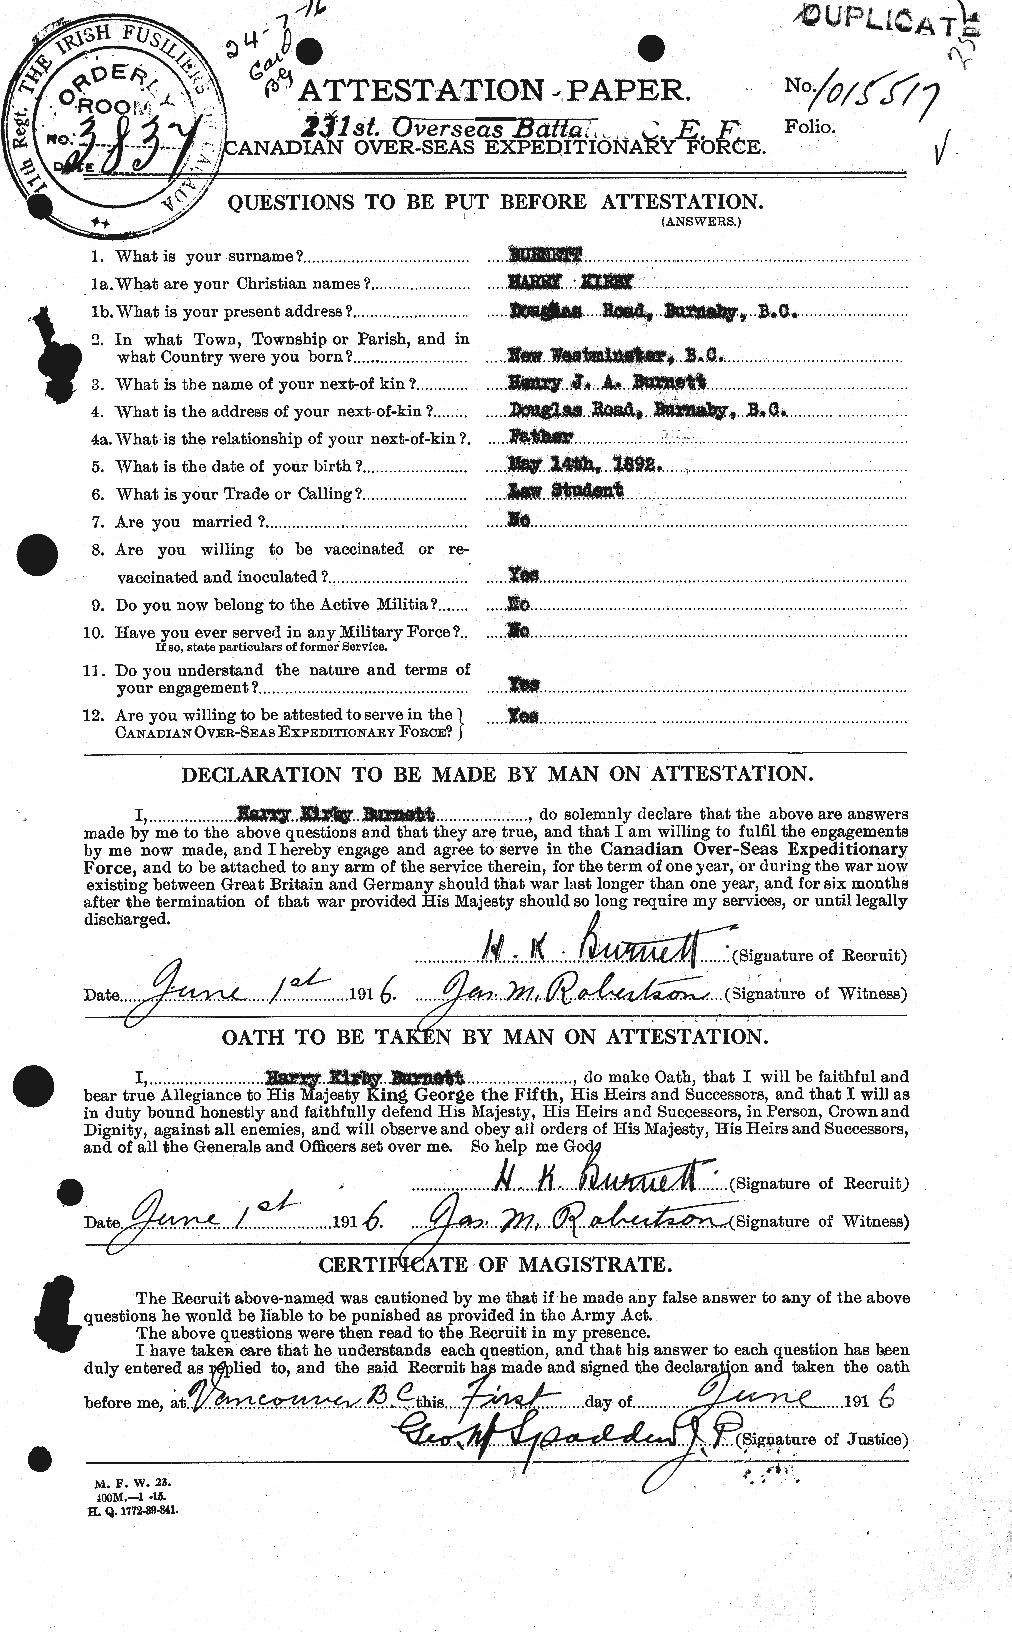 Personnel Records of the First World War - CEF 272104a